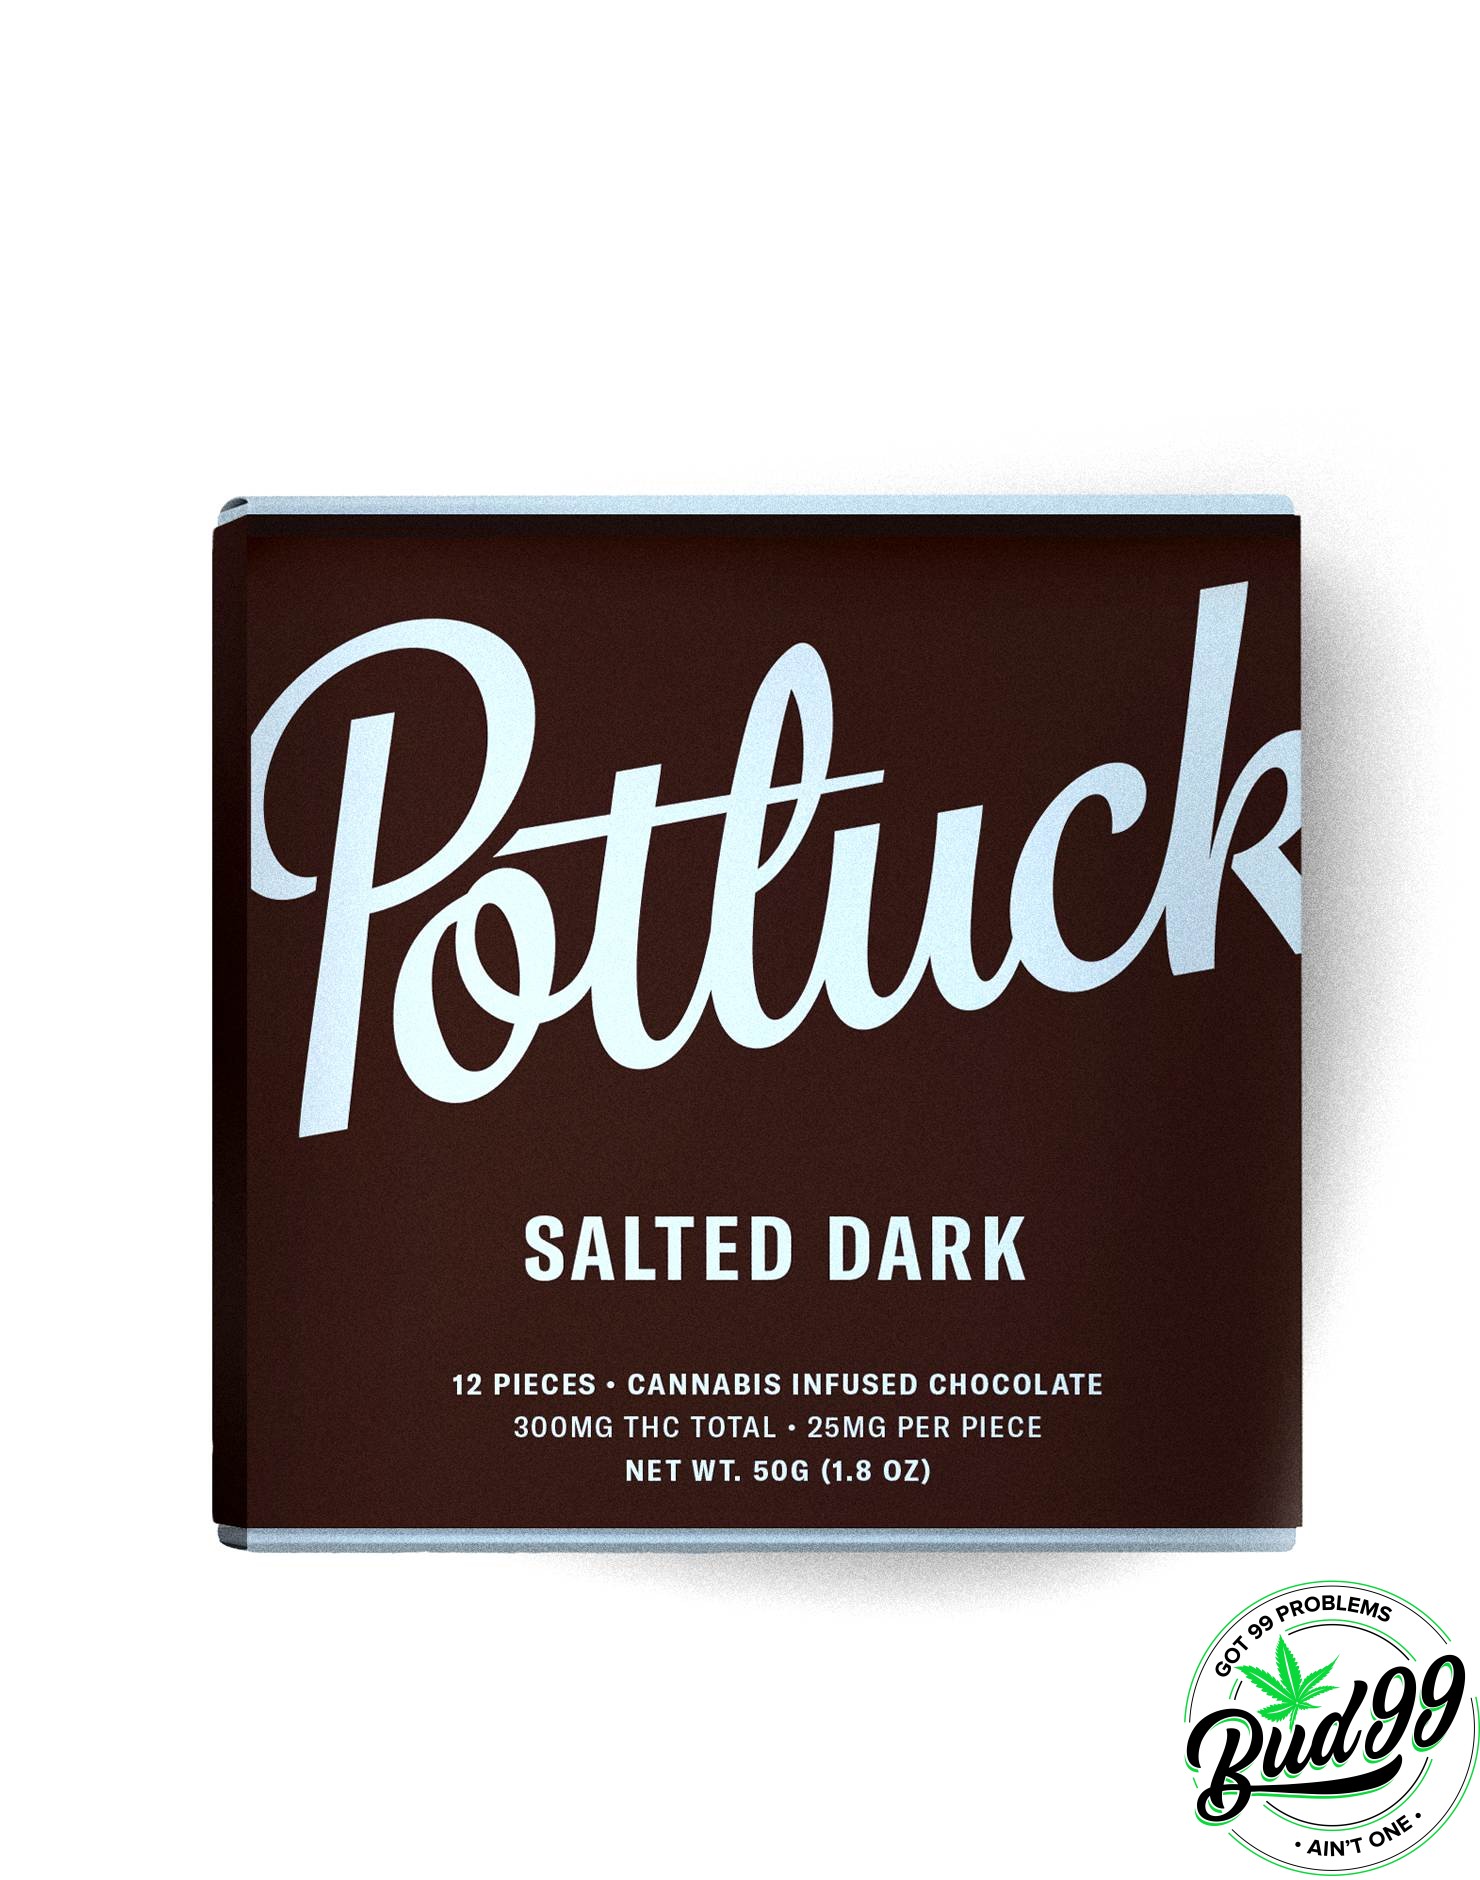 Shop Cannabis-Infused Edibles